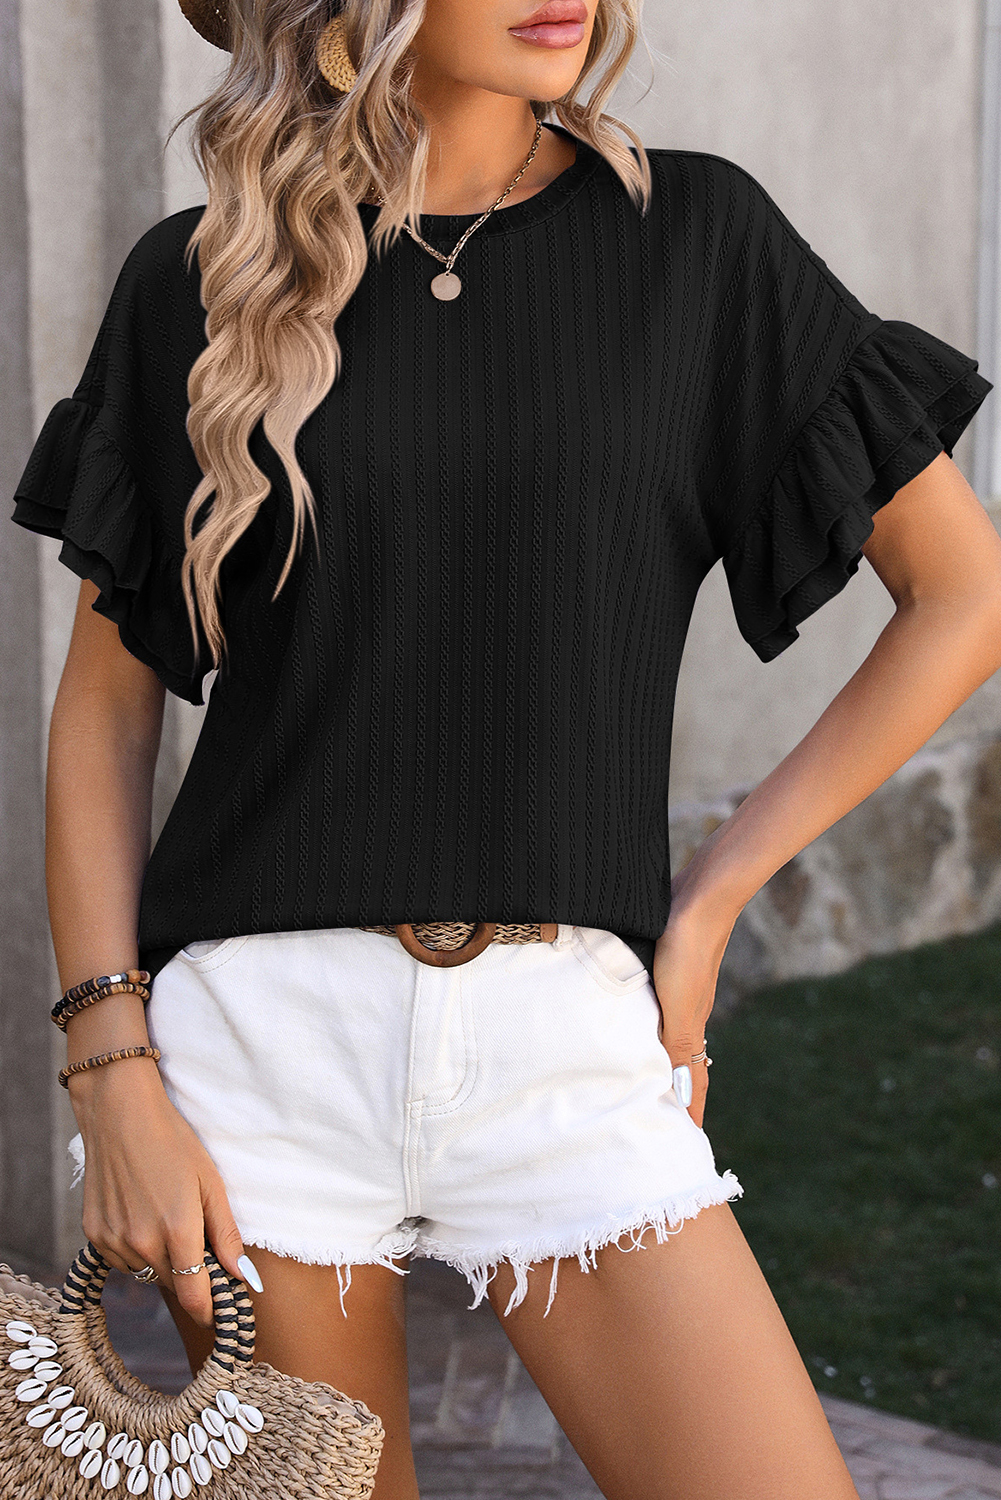 Shewin Wholesale Elegant Black Solid Color Textured Layered Ruffle Sleeve T SHIRT